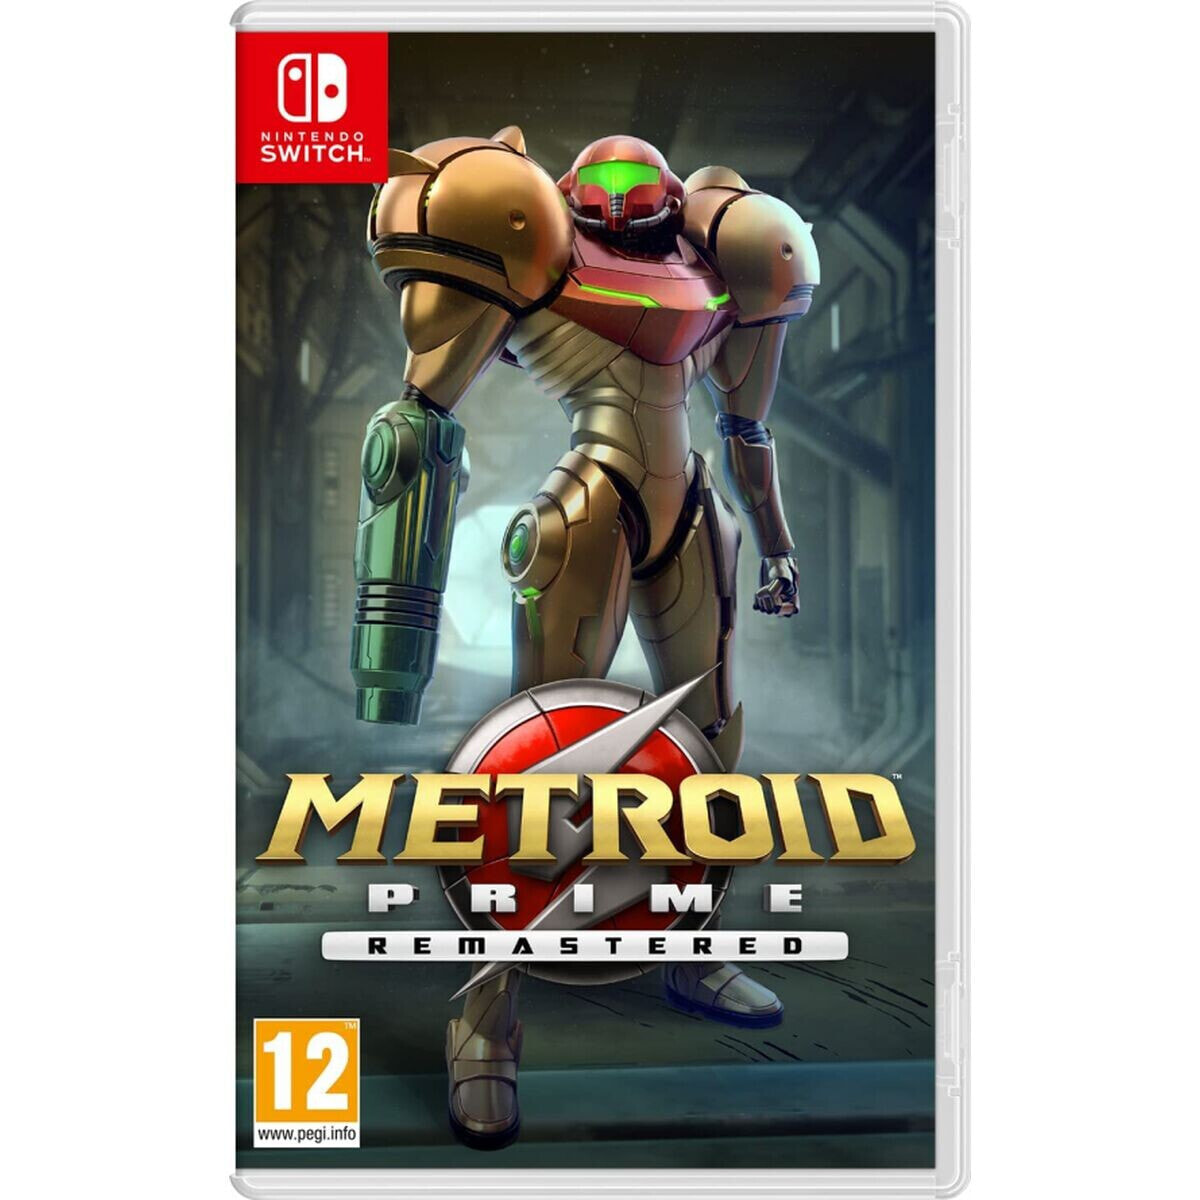 Video game for Switch Nintendo METROID PRIME REMASTERED